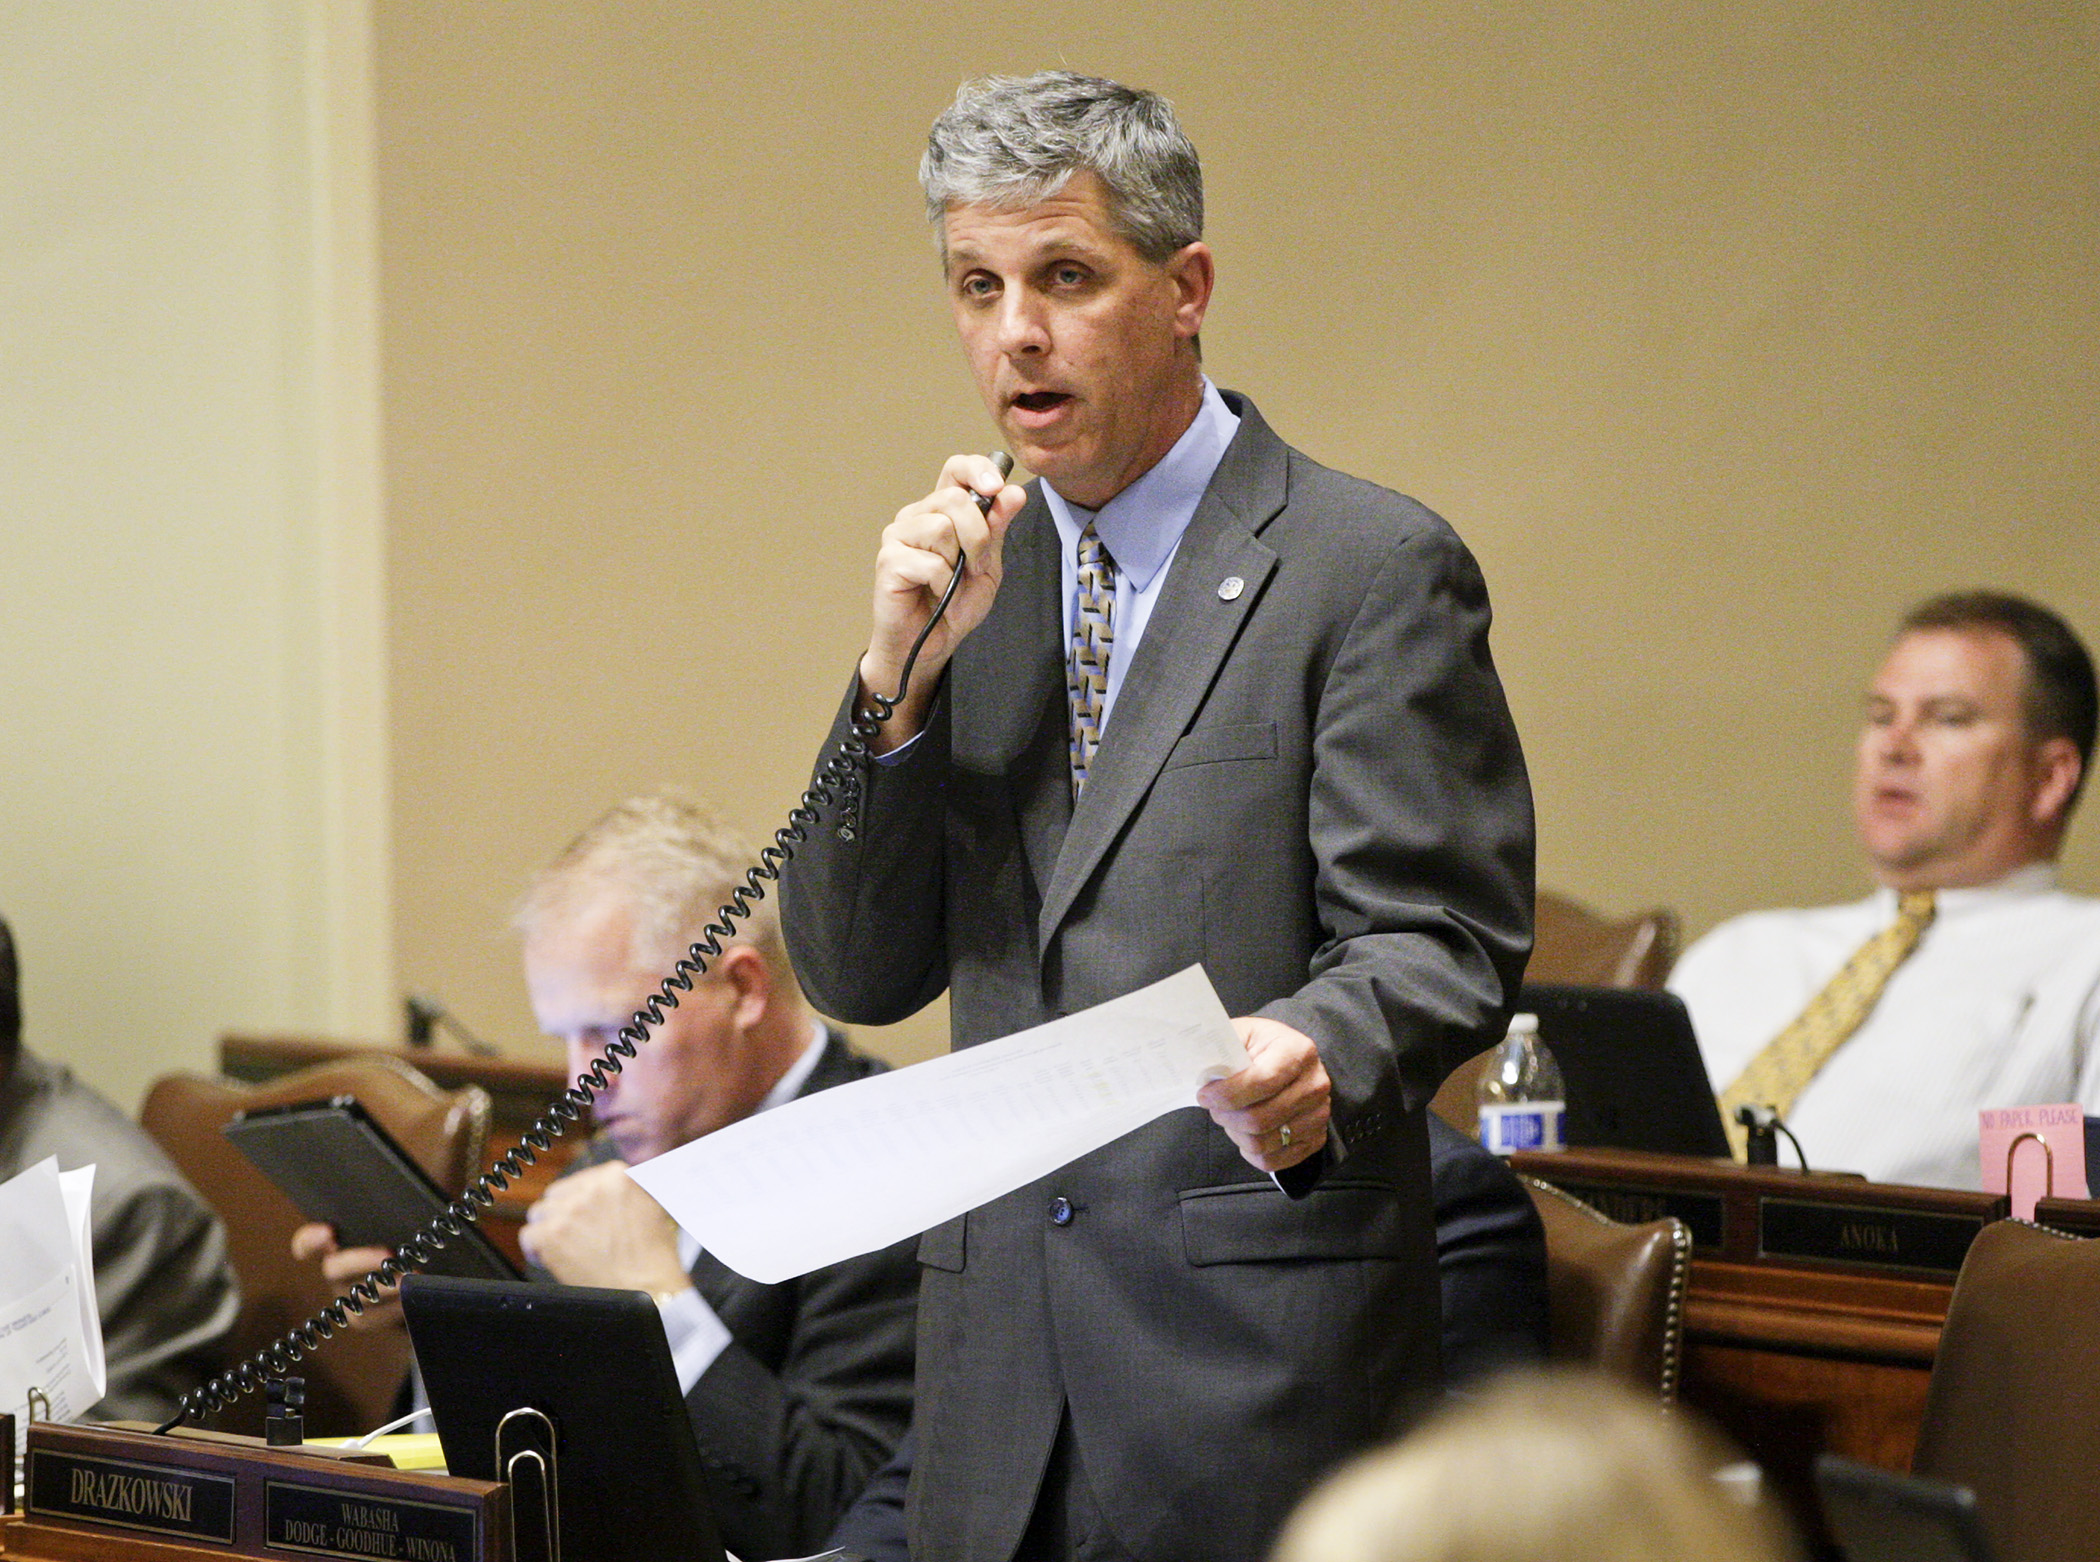 Rep. Steve Drazkowski discusses provisions of HF3585, which would ratify labor agreements and a compensation plan for certain state employees, during a floor session May 20. Photo by Paul Battaglia